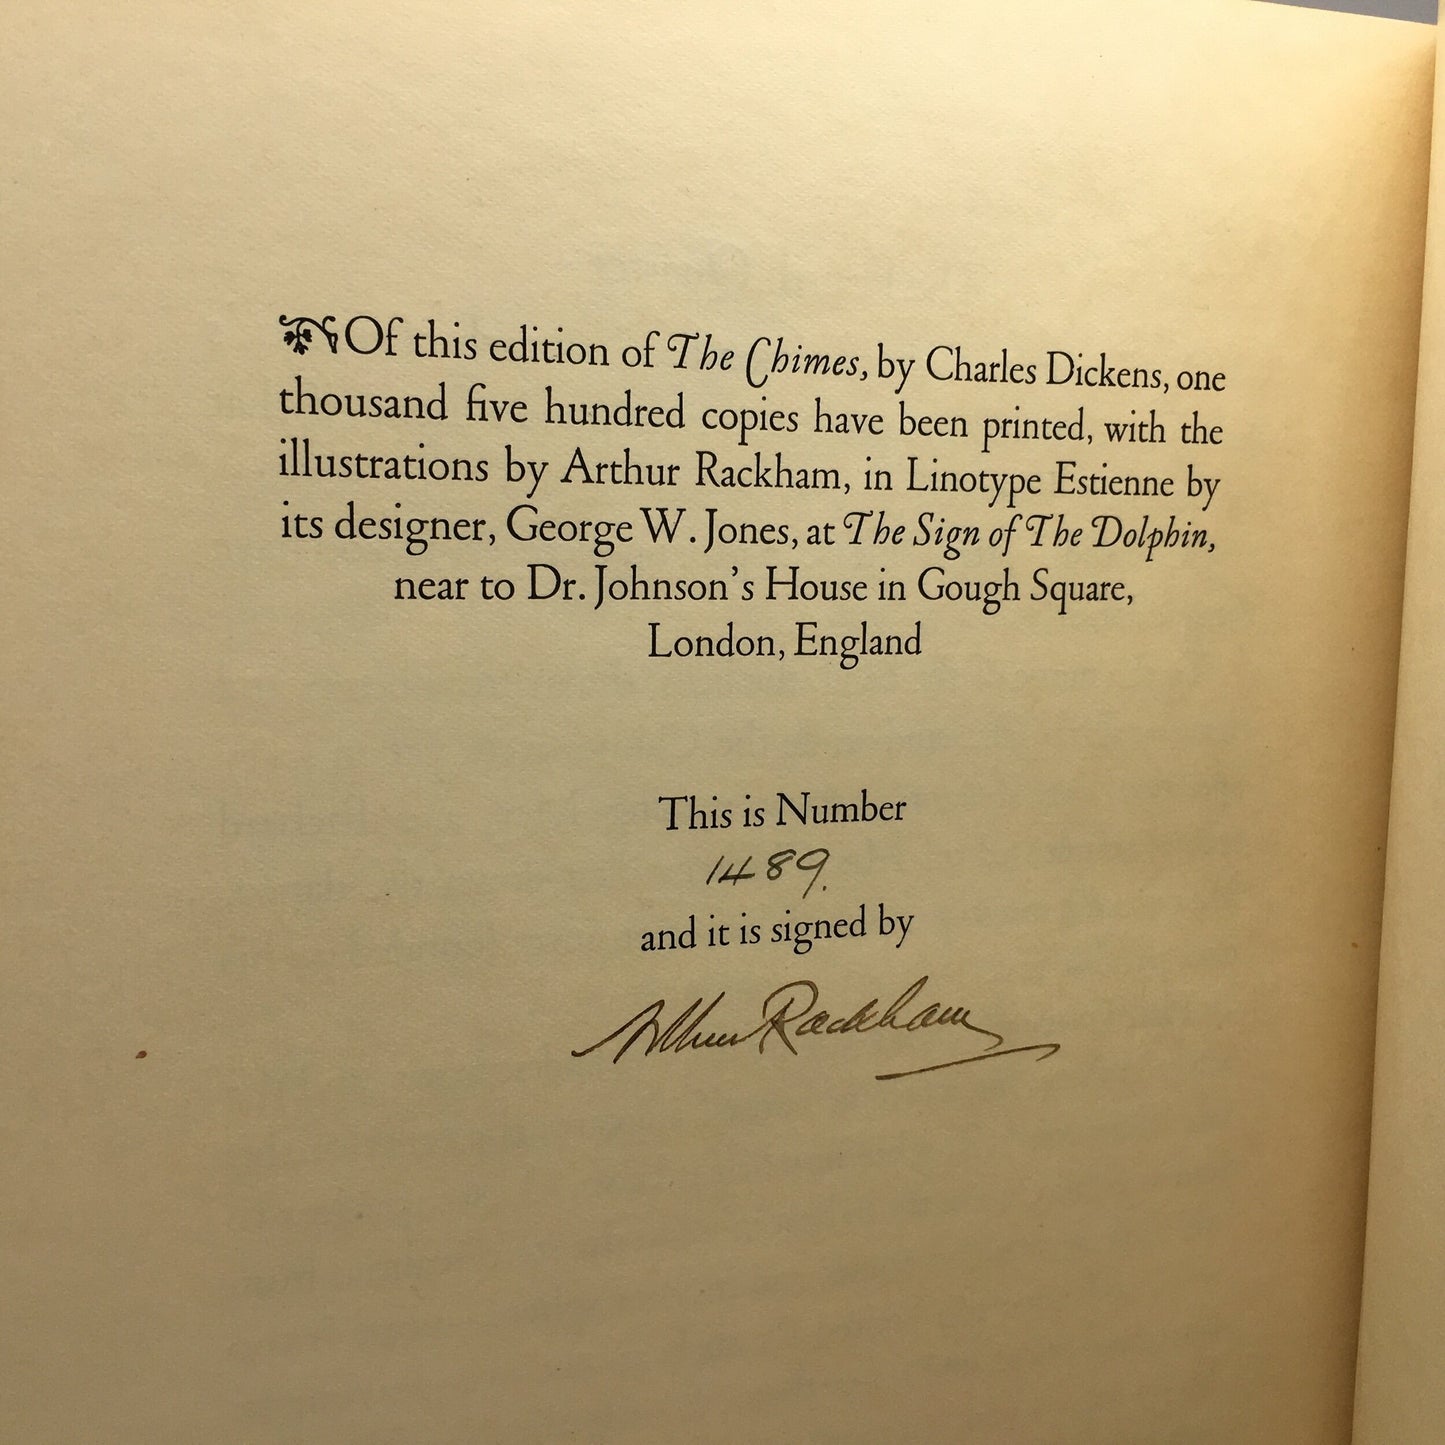 DICKENS, Charles "The Chimes" [Limited Editions Club, 1931] - Illustrated/Signed by Arthur Rackham - Buzz Bookstore